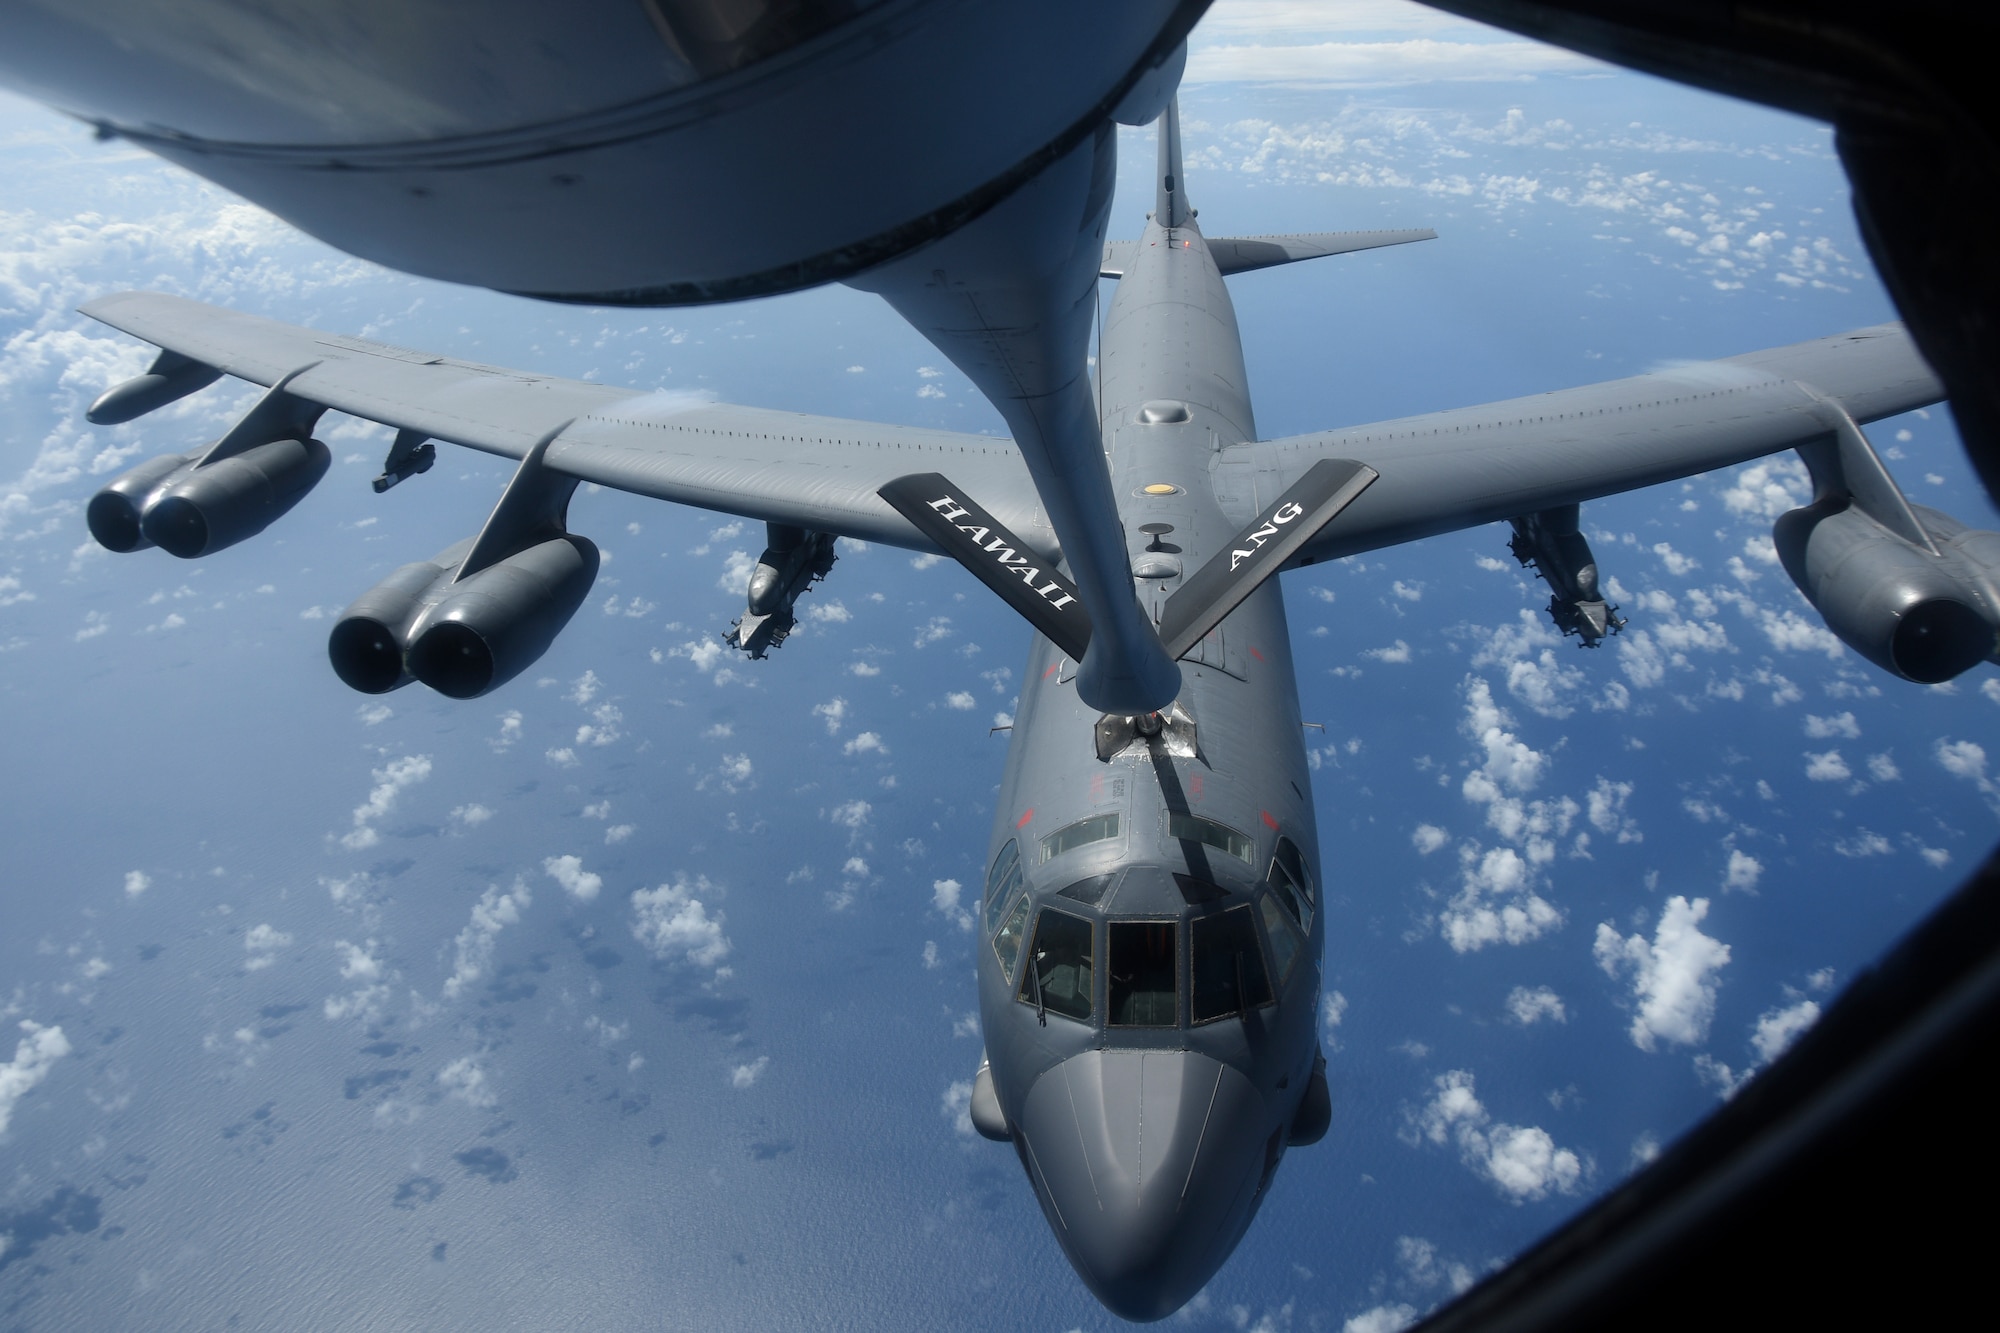 A U.S. Air Force B-52H Stratofortress bomber gets refueled over the Pacific Ocean during a routine training mission Aug. 2, 2018. This mission was flown in support of U.S. Indo-Pacific Command’s Continuous Bomber Presence operations, which are a key component to improving combined and joint service interoperability. (U.S. Air Force photo by Airman 1st Class Gerald R. Willis)